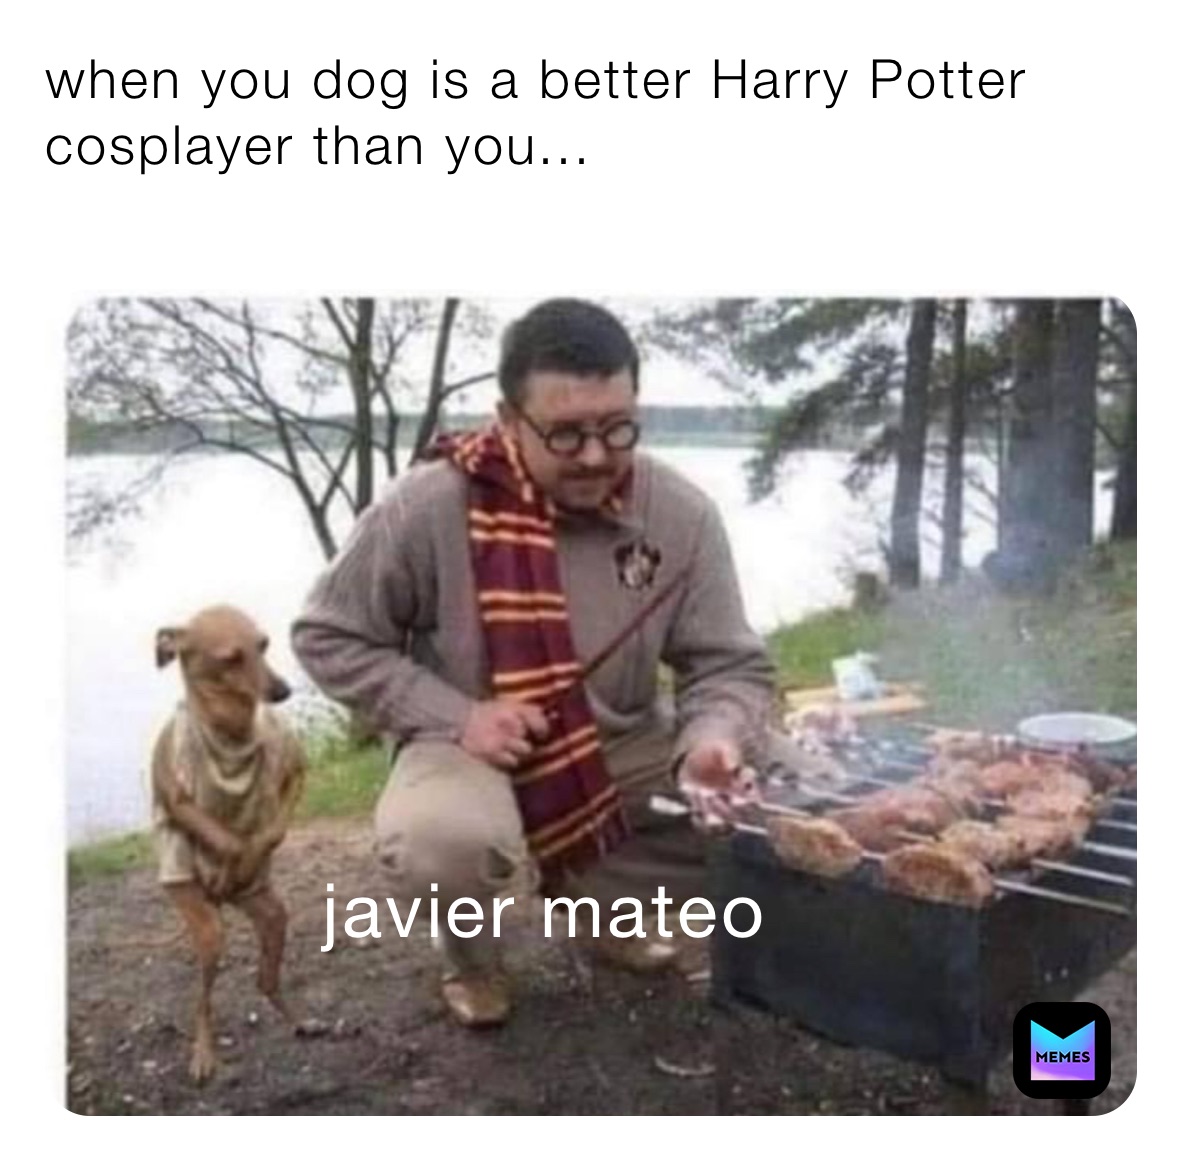 when you dog is a better Harry Potter cosplayer than you...
